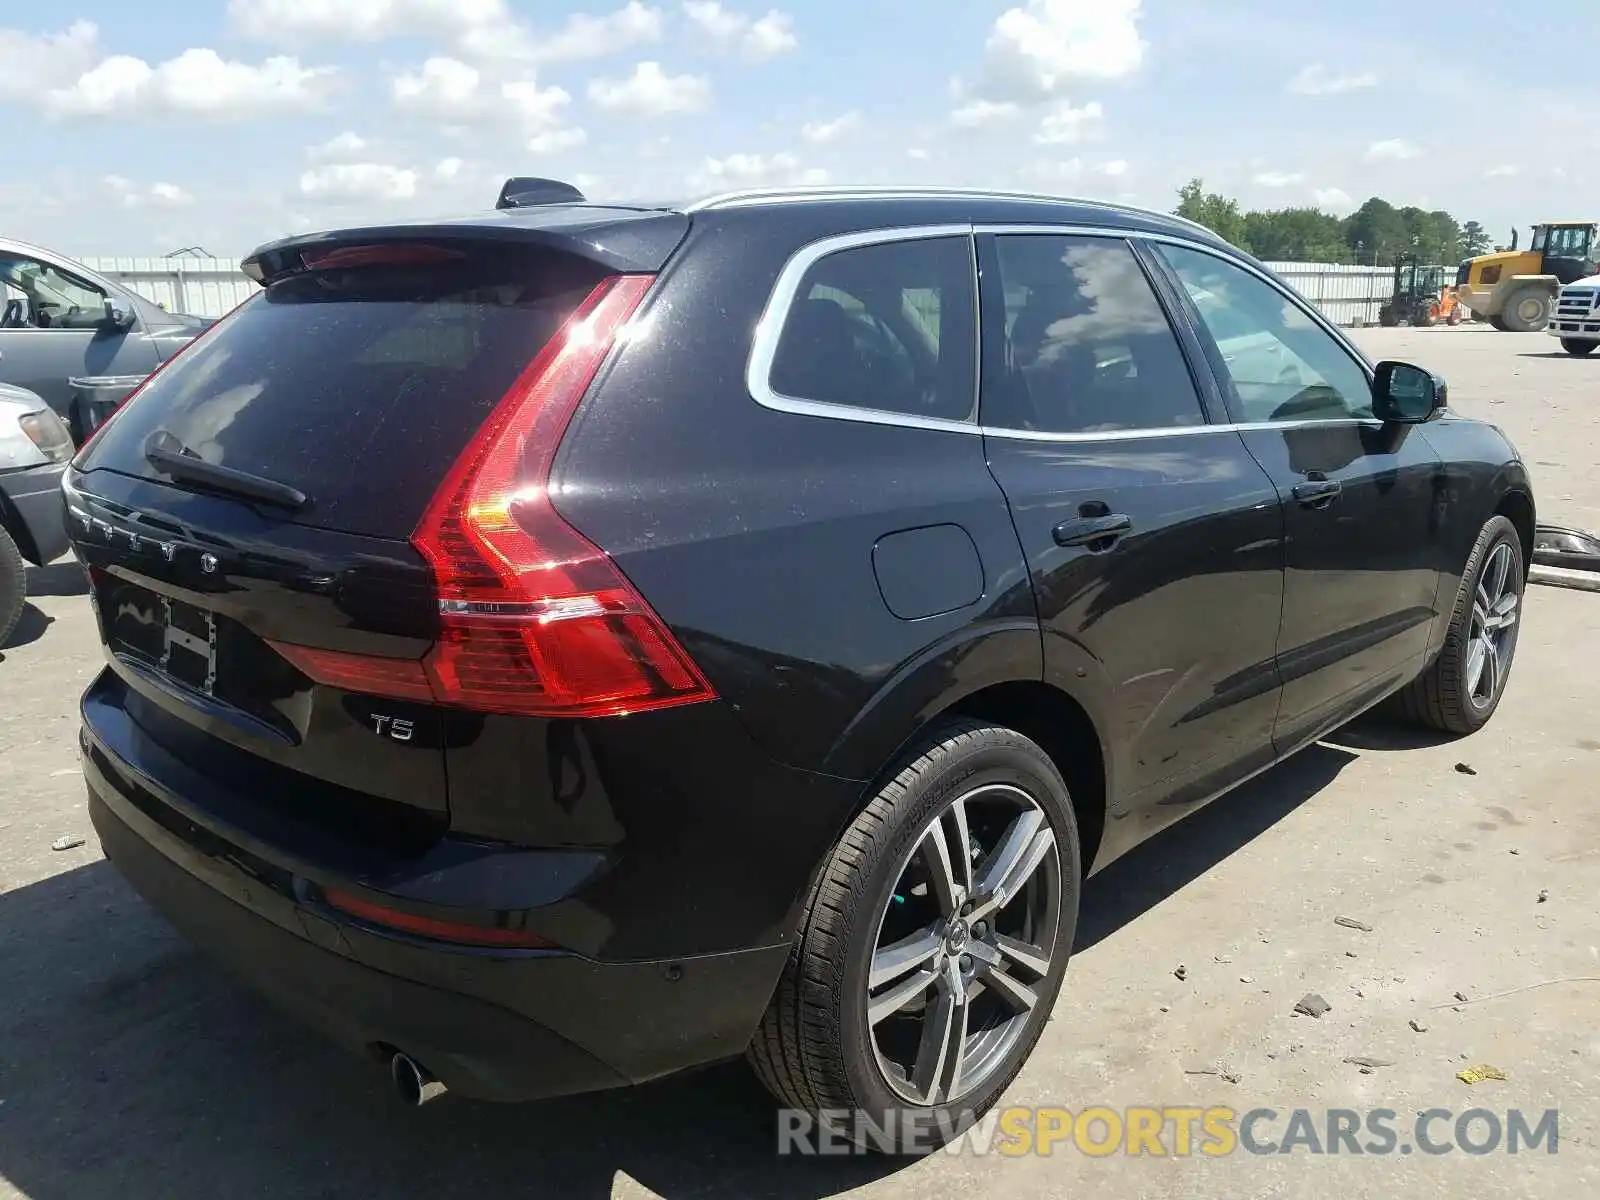 4 Photograph of a damaged car LYV102DK0KB188312 VOLVO XC60 T5 MO 2019